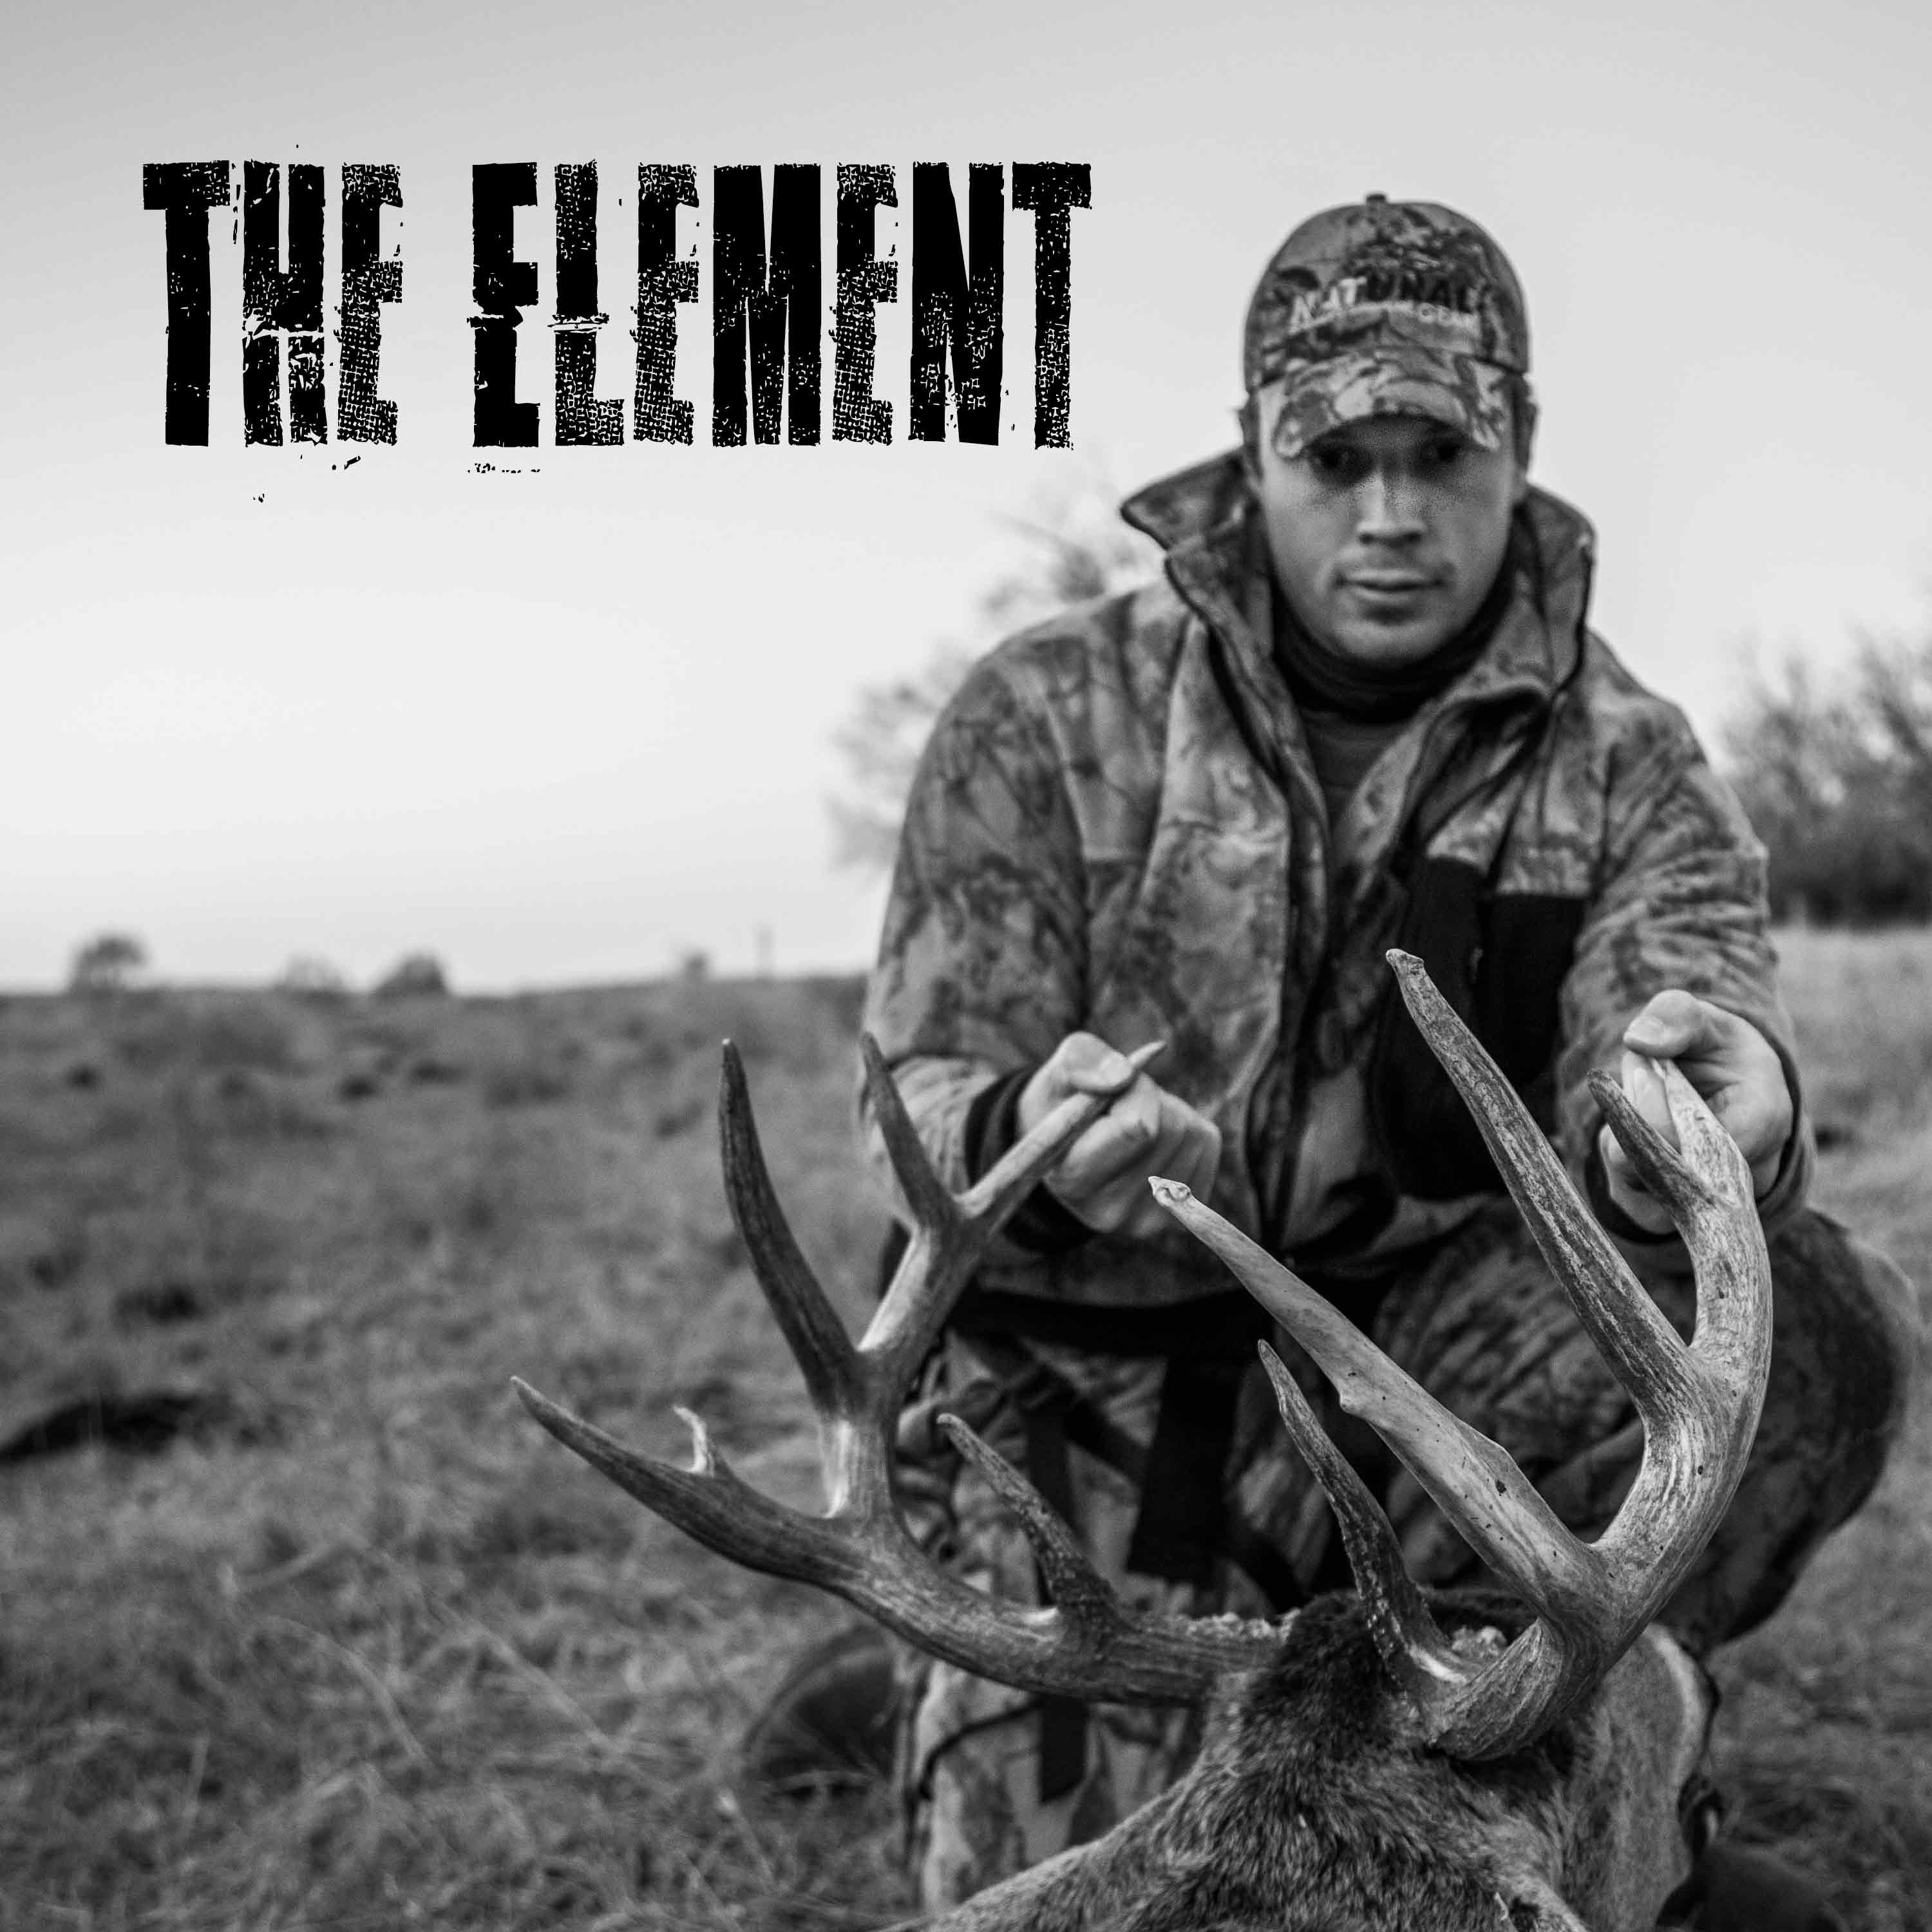 E119: Happy Hunting (feat. Zach Ferenbaugh of The Hunting Public on How to Hunt with Friends, Turkey vs. Deer, Spring Fishing, and Having No Regrets)